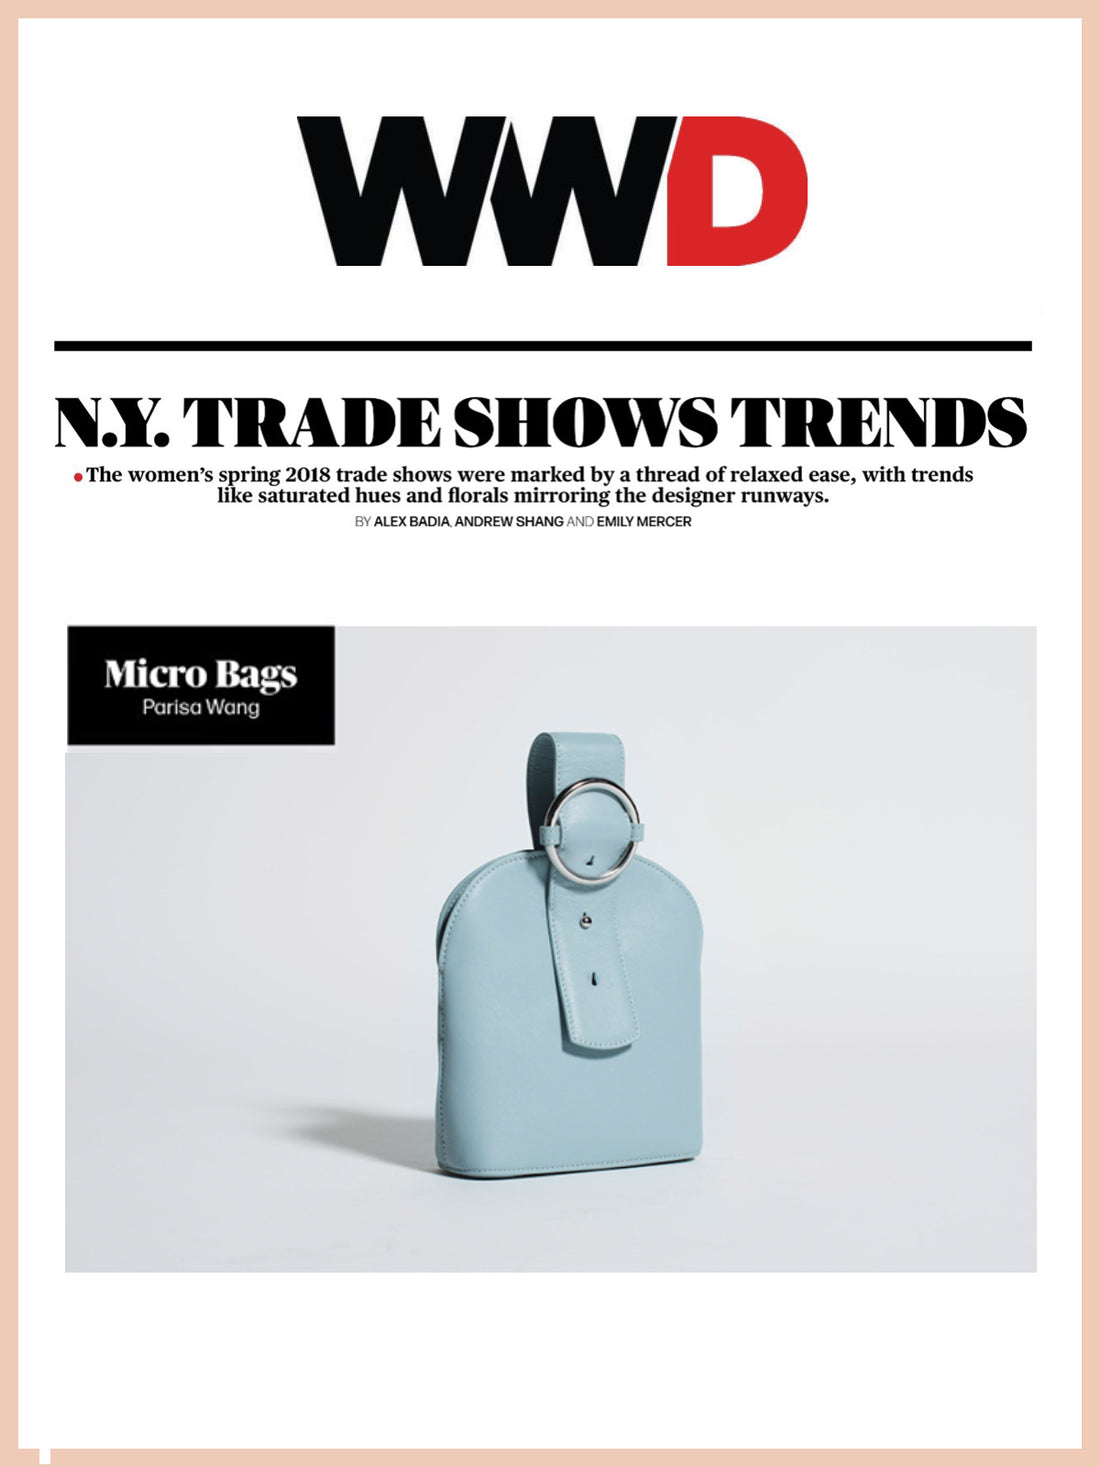 WWD, The Best NY Trade Show Trends